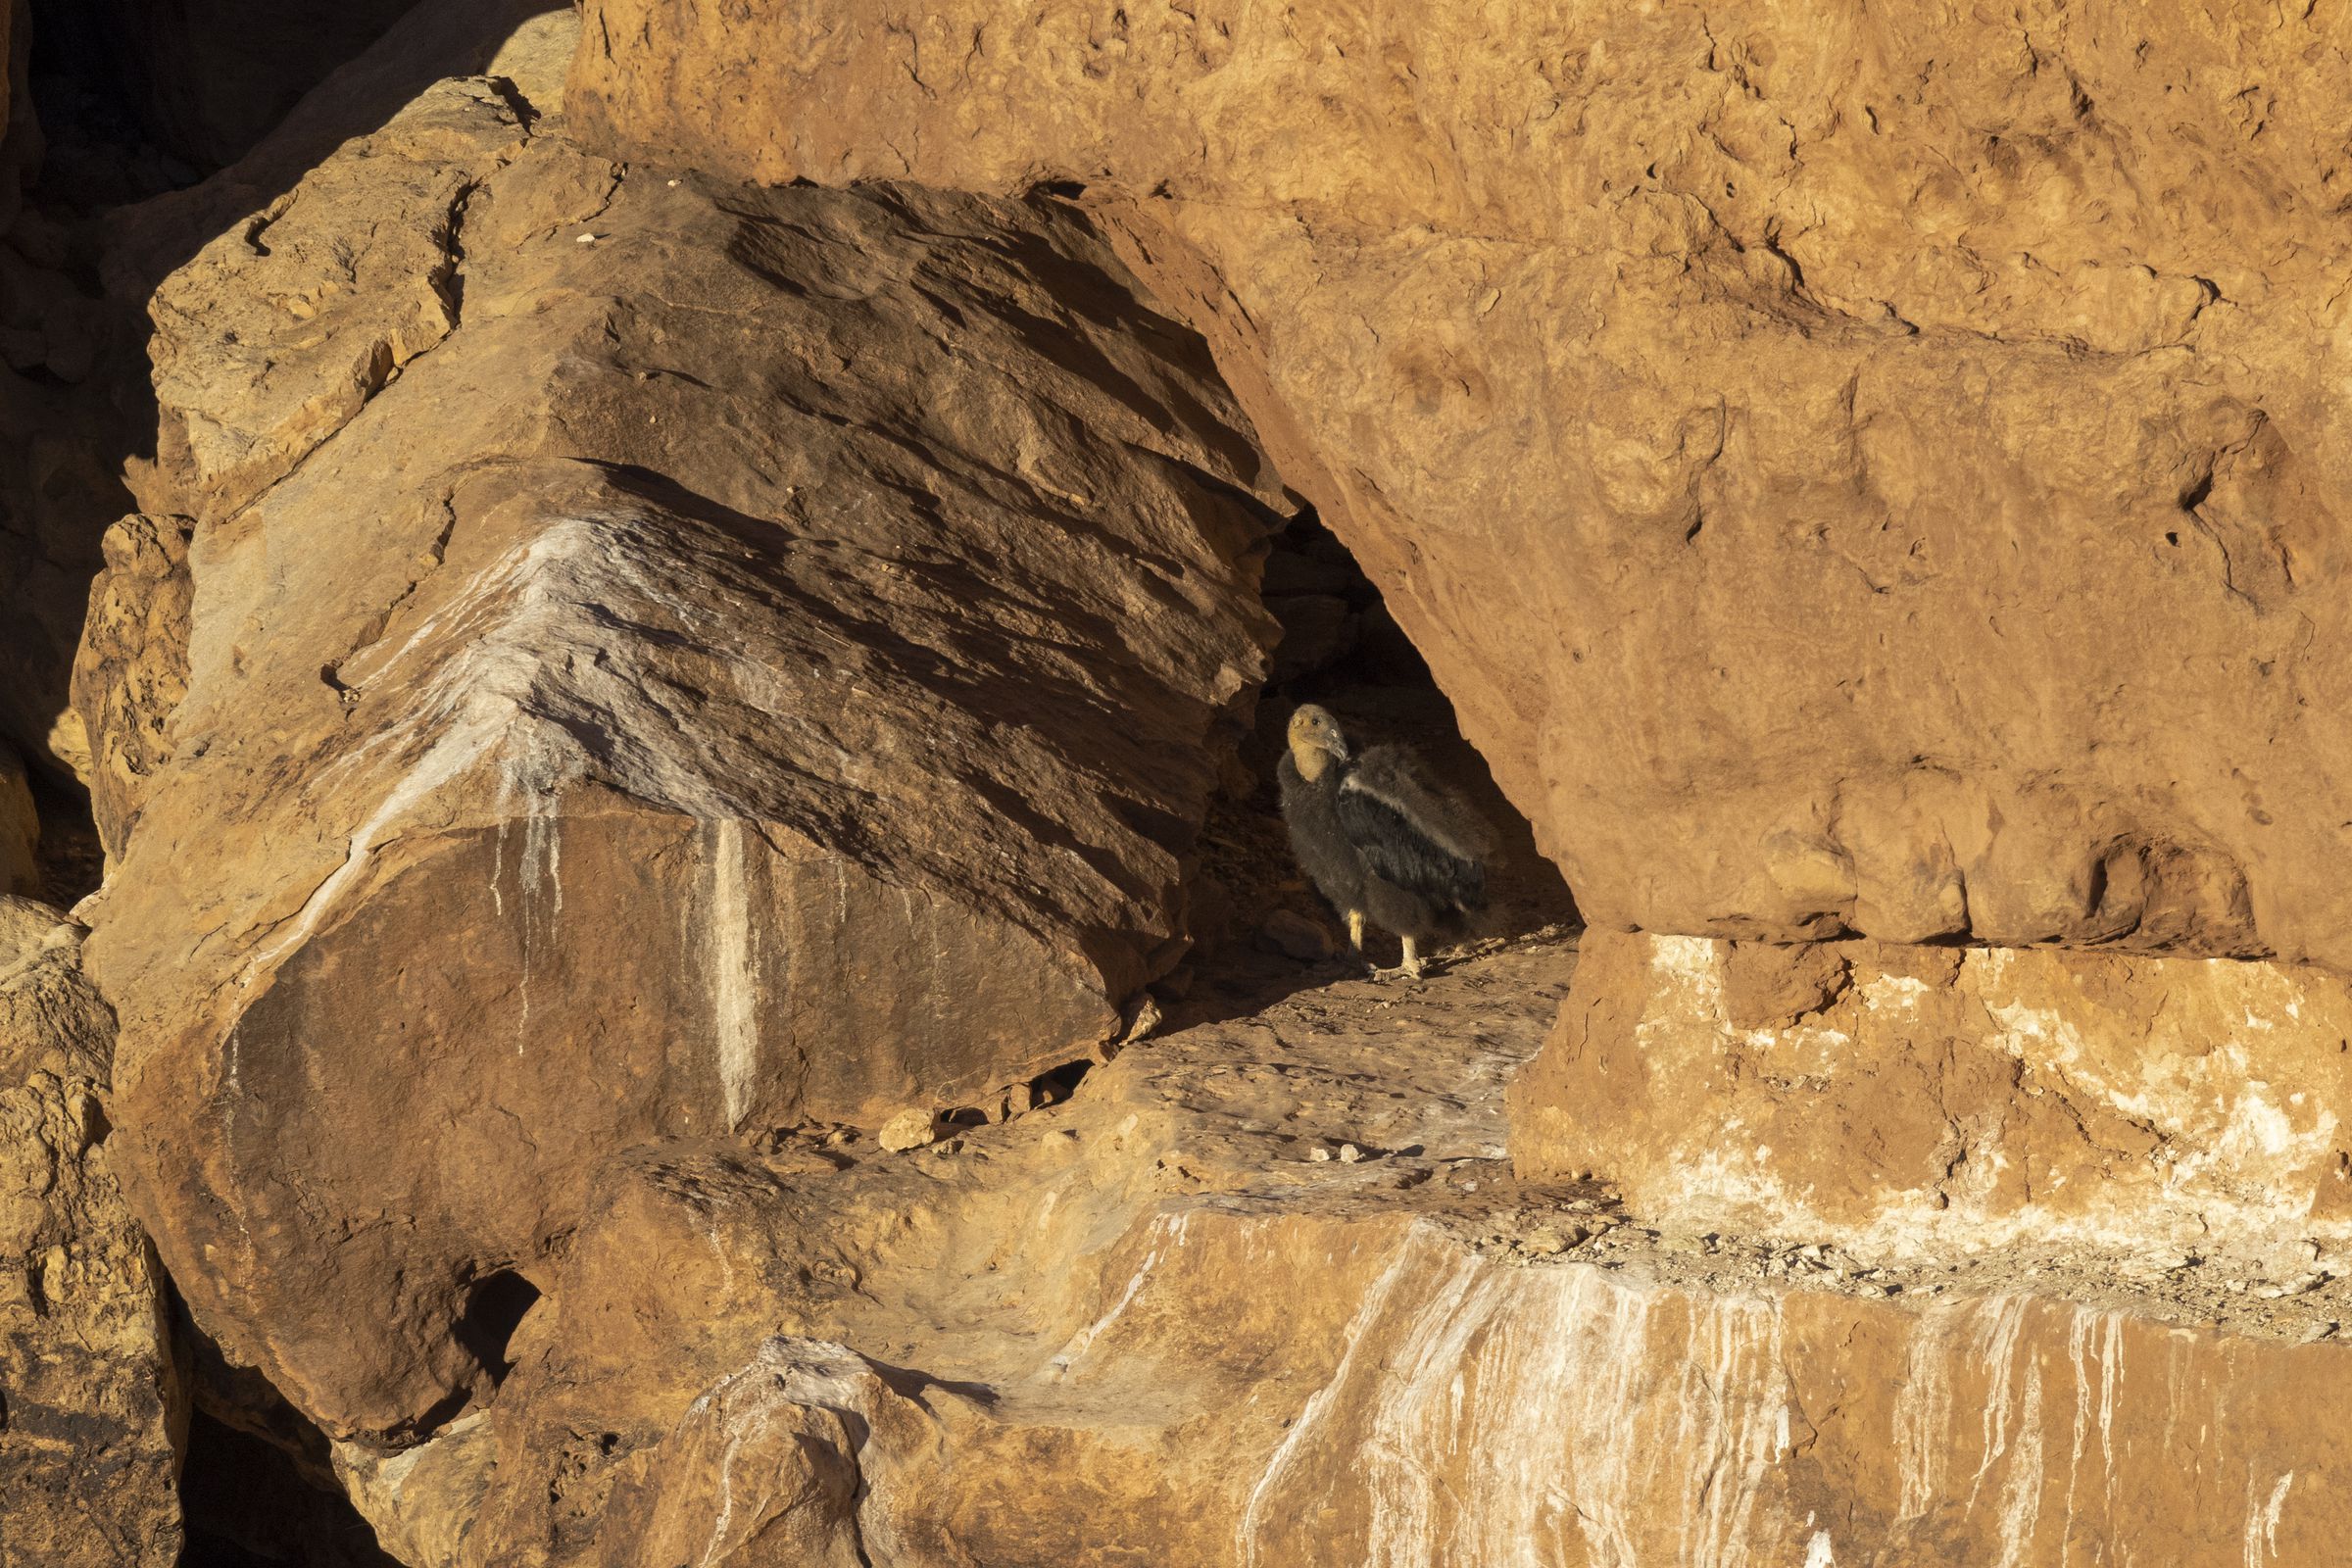 A condor chick stands on a rock formation.